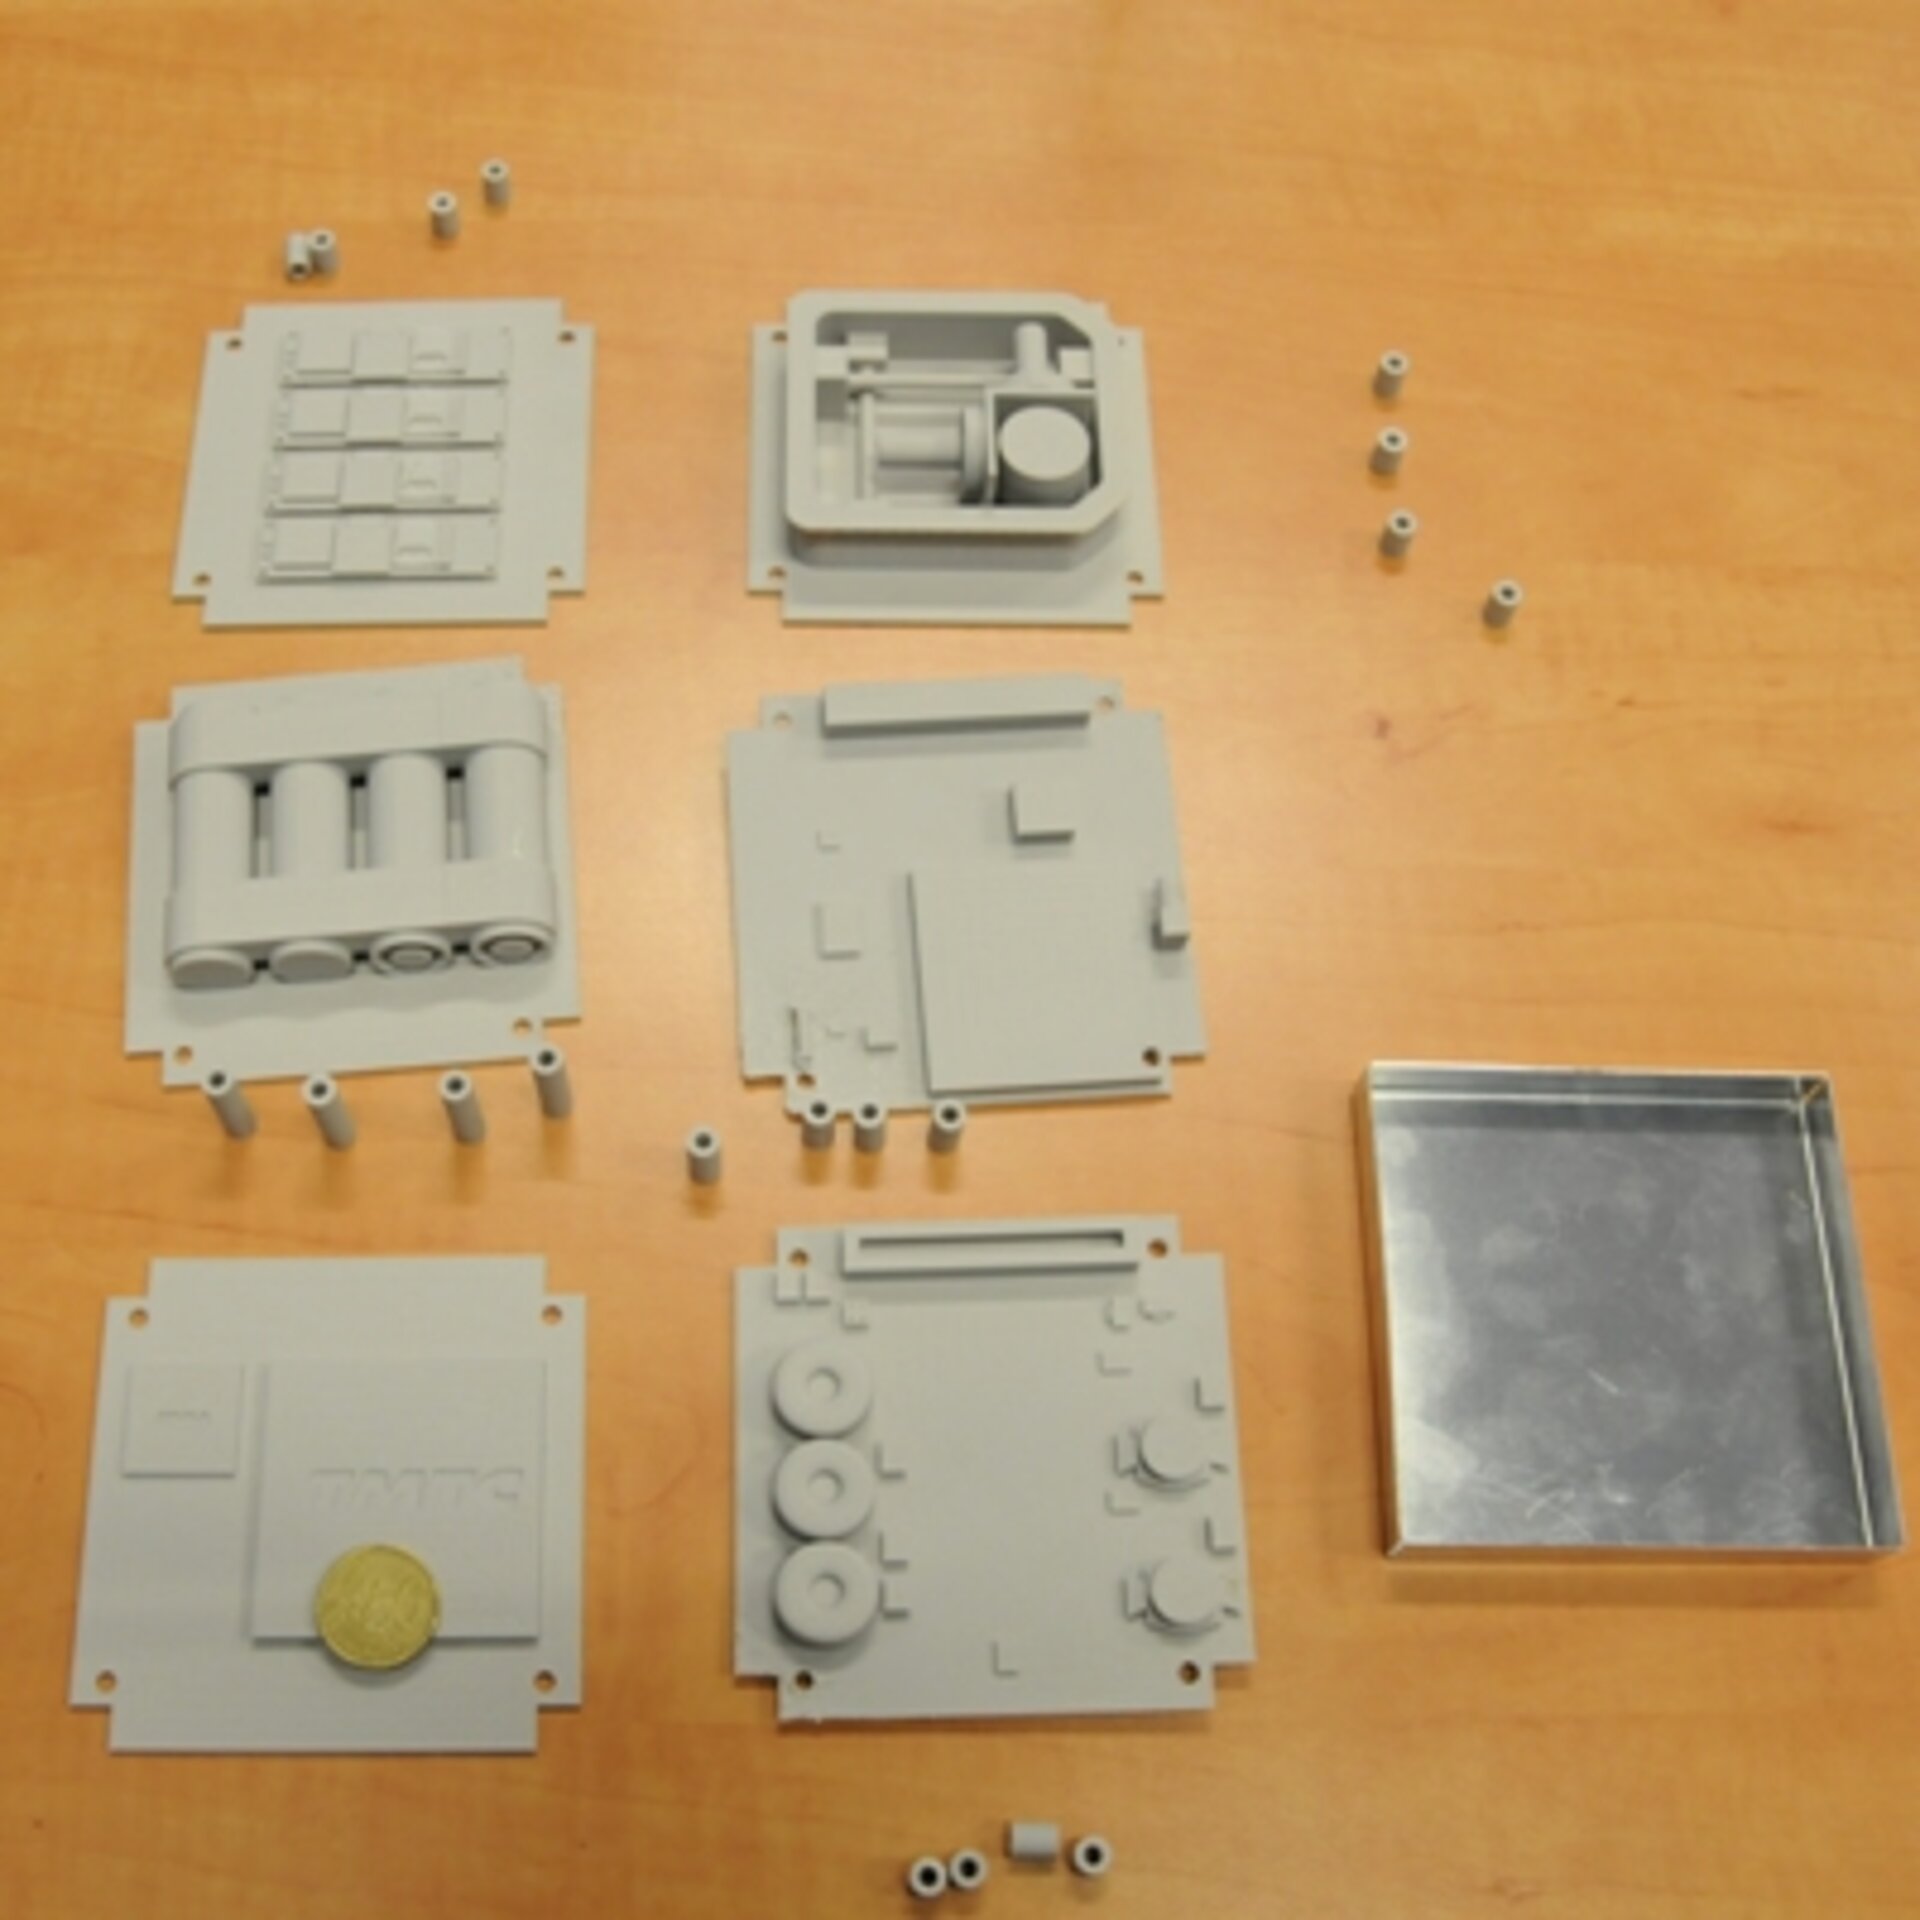 Model components laid out with fifty Euro cent coin to show relative size